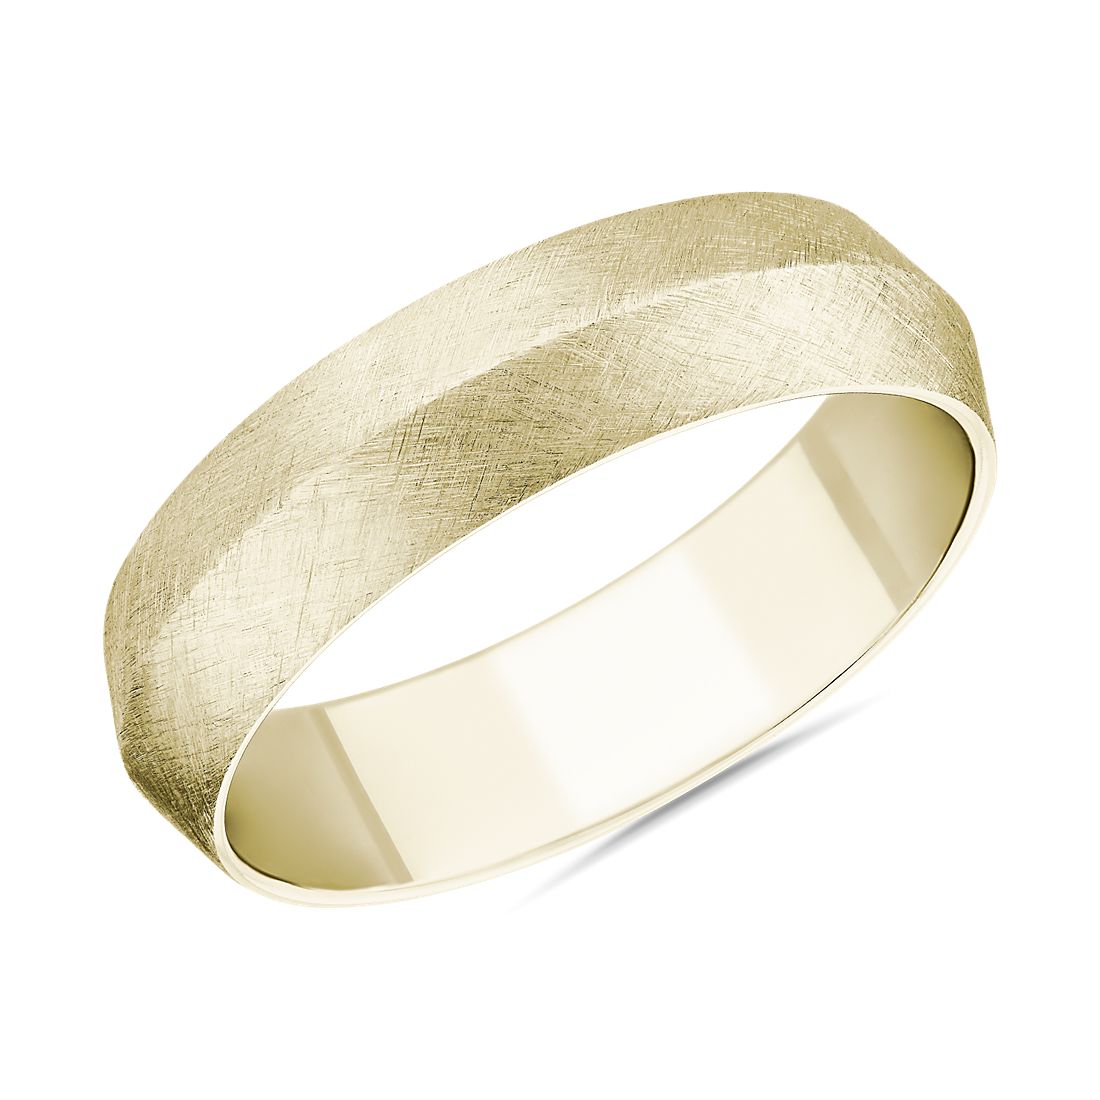 Textured Knife Edge Wedding Ring in 14k Yellow Gold (6 mm)